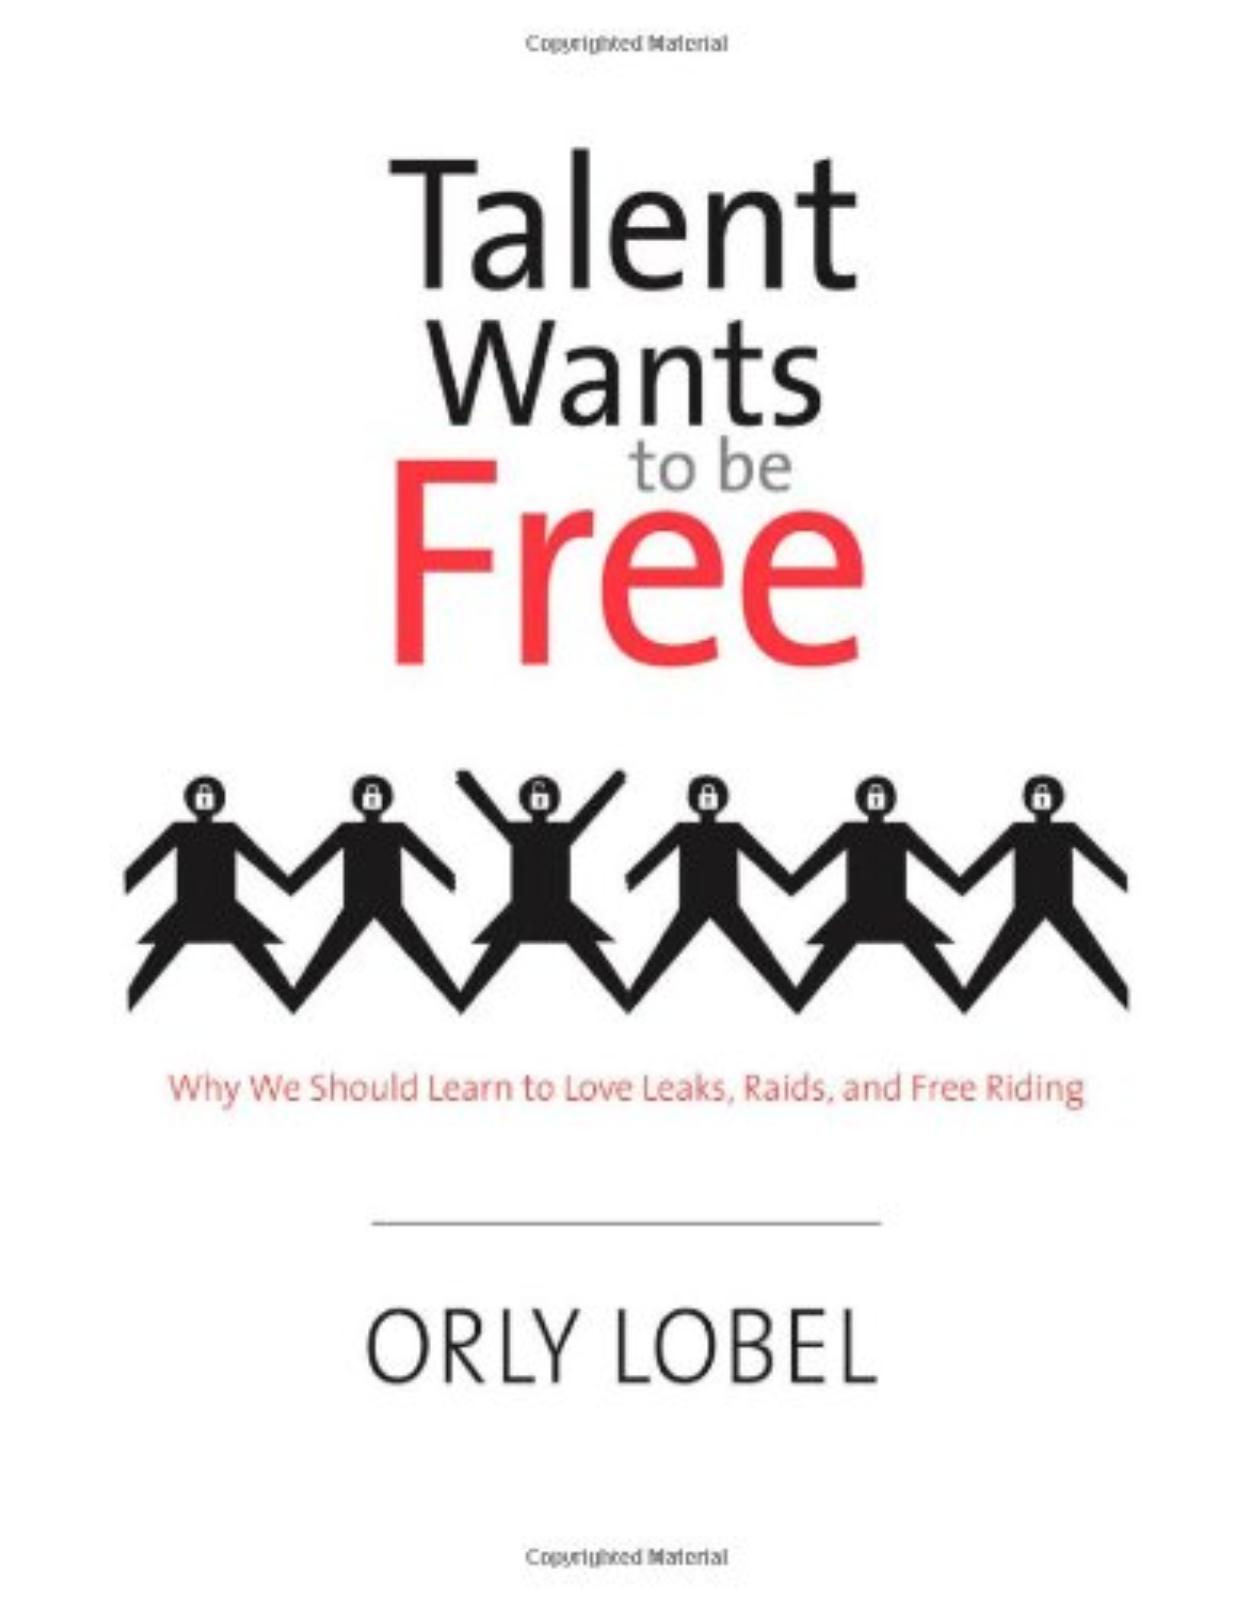 Talent Wants to Be Free. Why We Should Learn to Love Leaks, Raids, and Free Riding